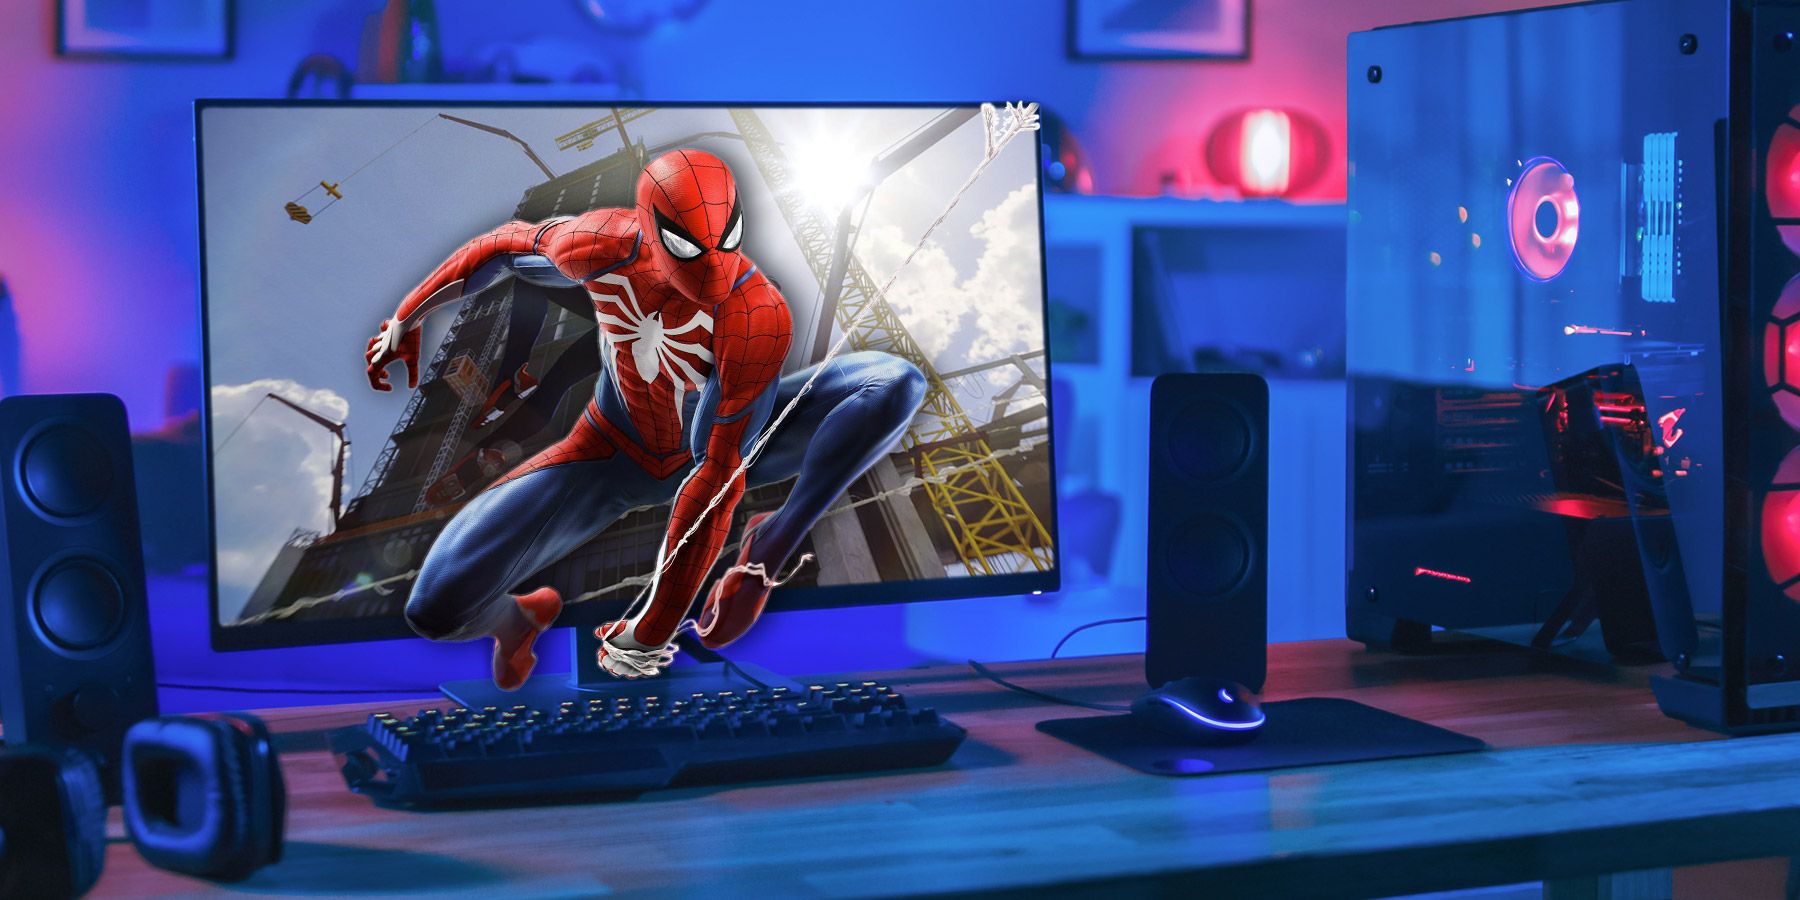 What to Know Before Buying Marvel's Spider-Man on PC